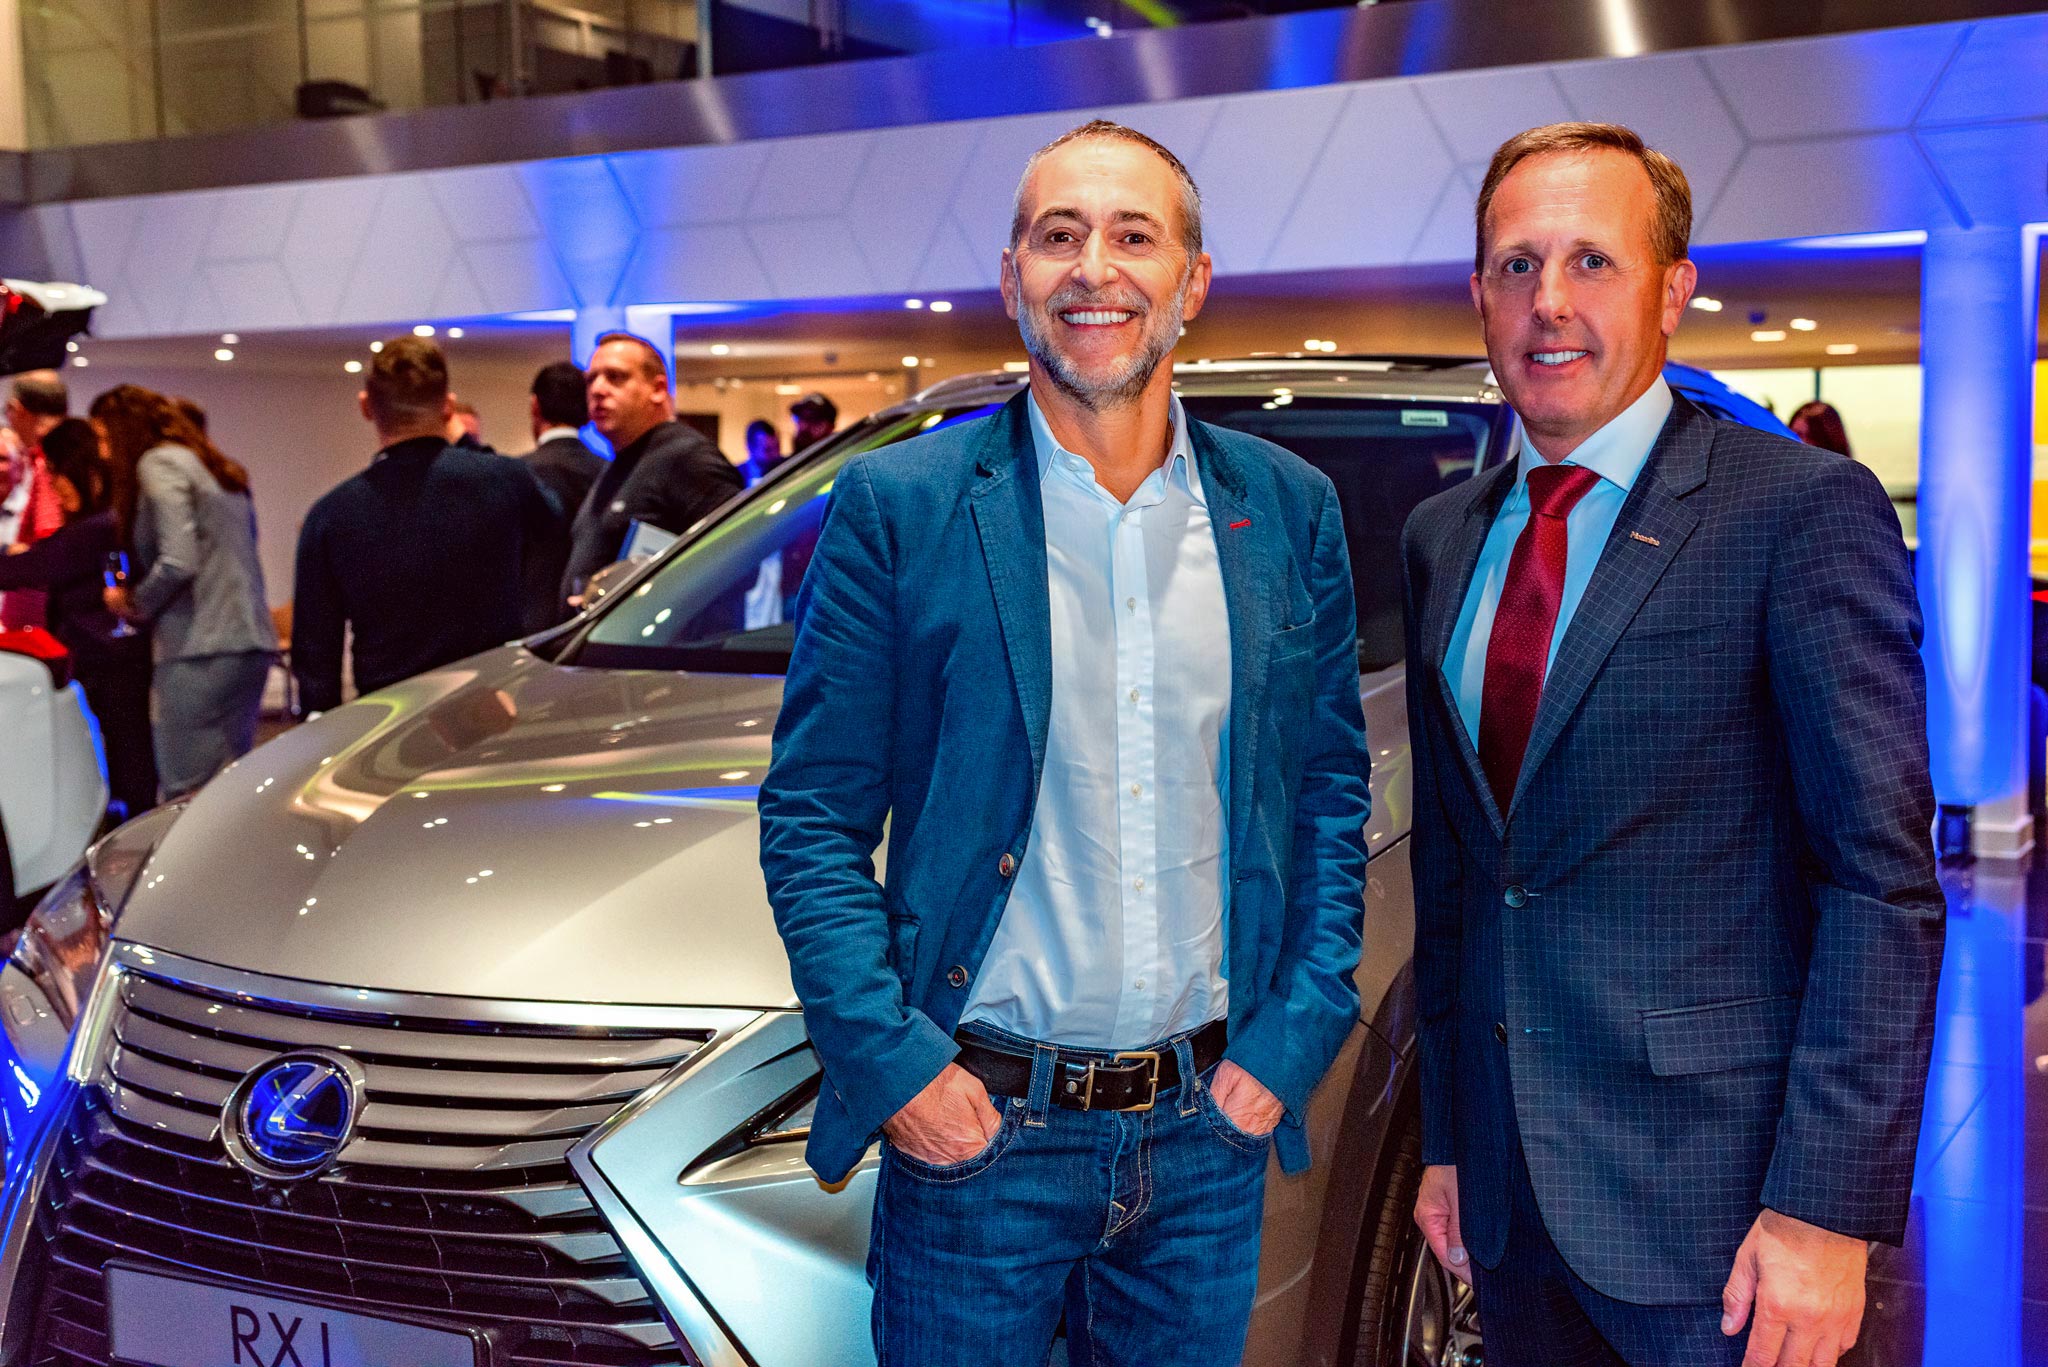 A moment captured at a corporate sales event, featuring renowned chef Michel Roux standing alongside the directors of a car showroom (Lexus). Both individuals smile at the camera, exuding enthusiasm and professionalism as they showcase a brand new Lexus model.